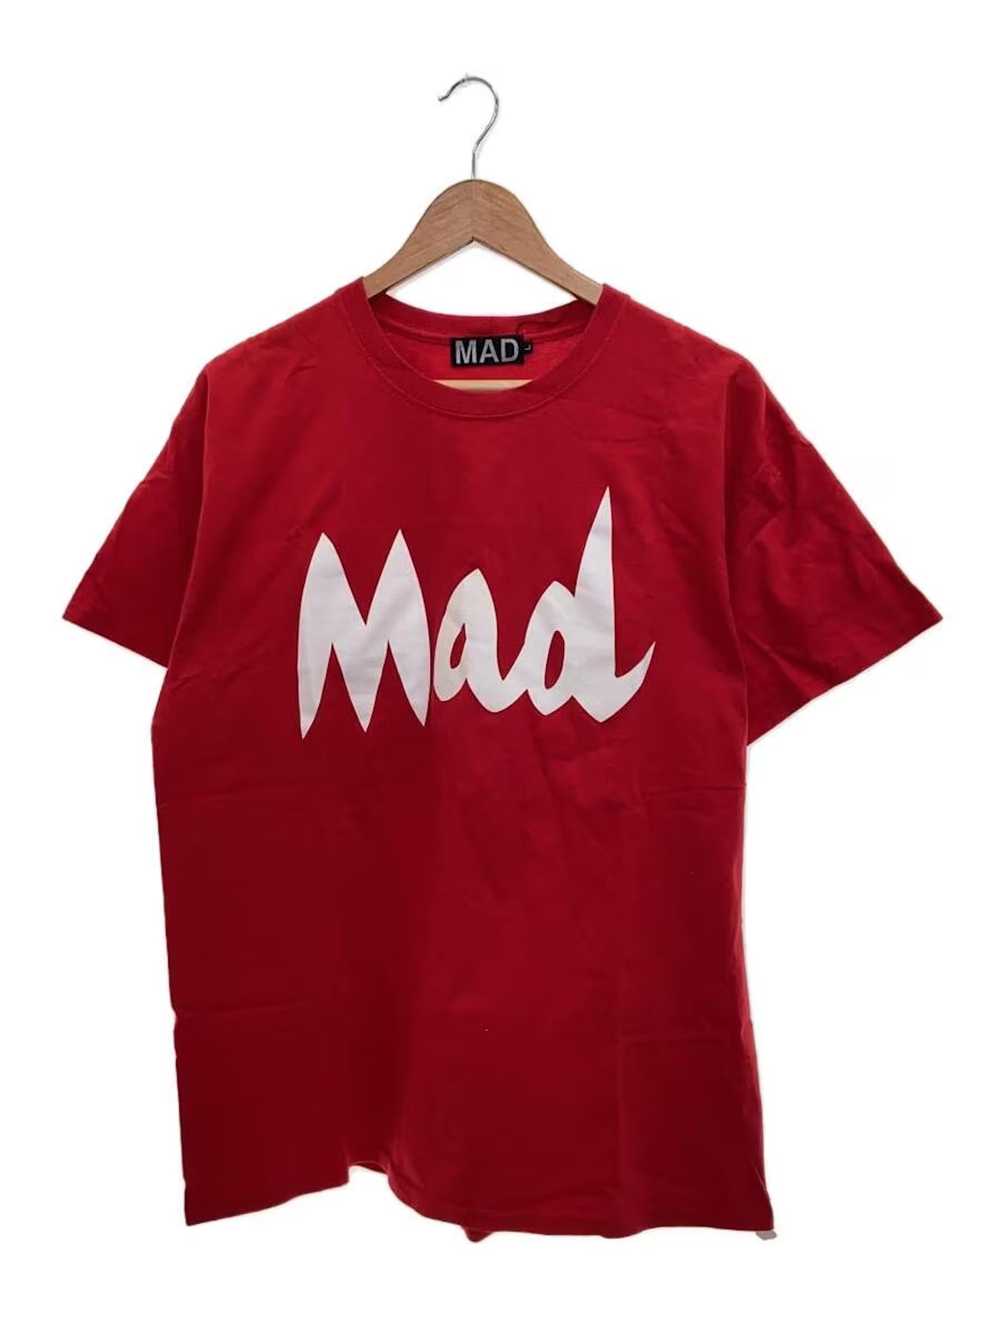 Undercover MAD Store Tee - image 1